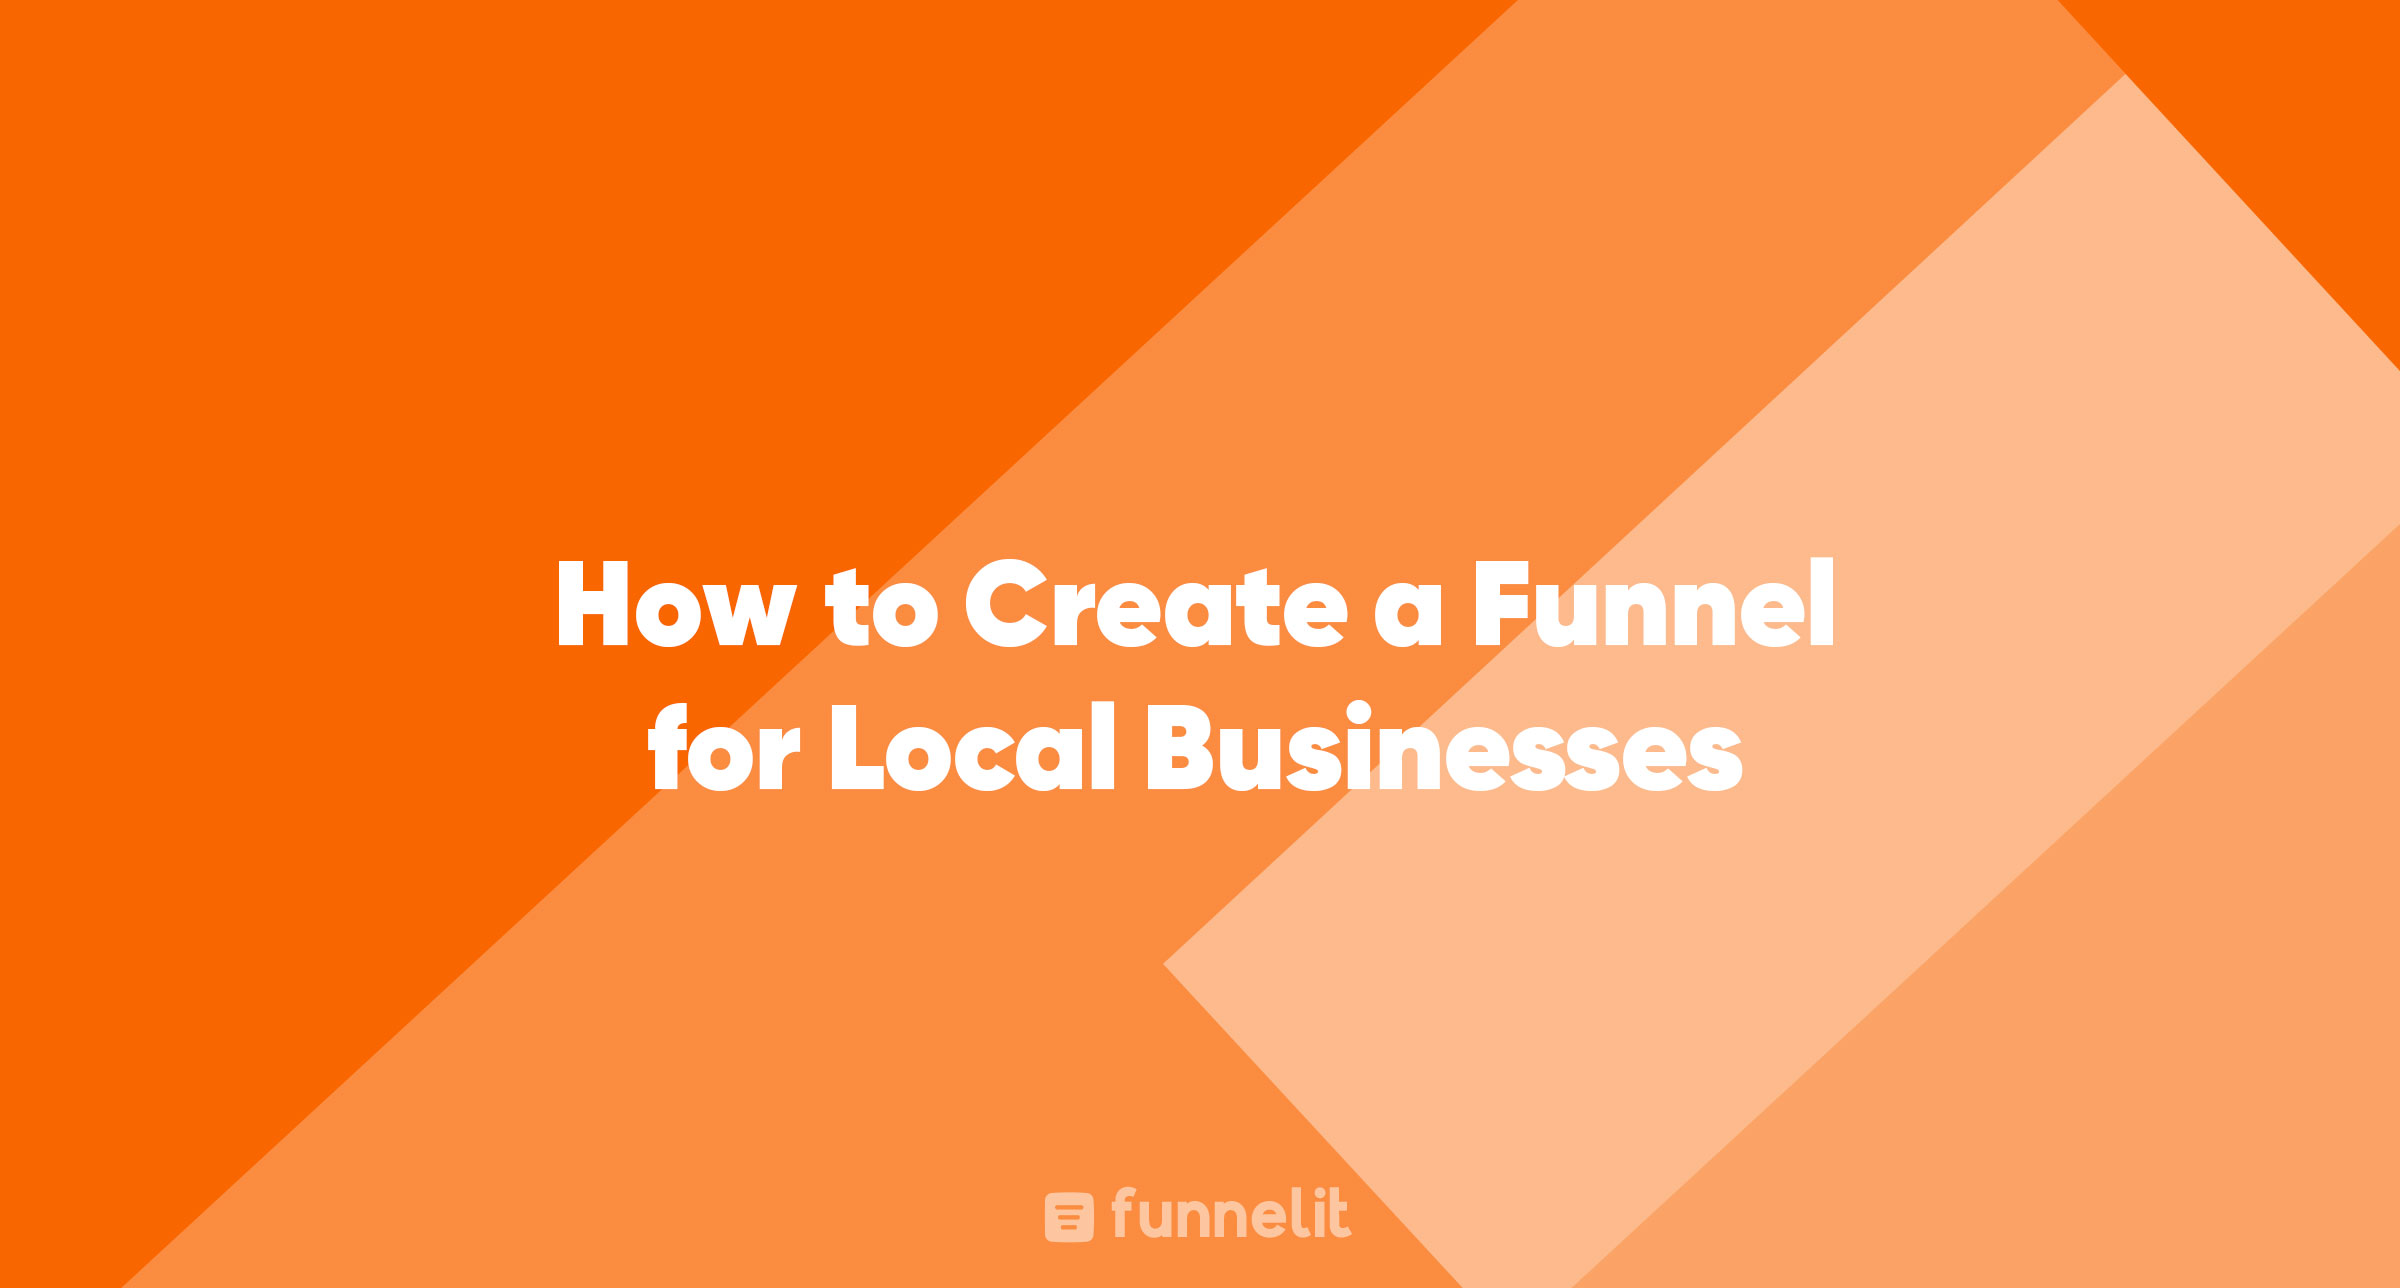 Article | How to Create a Funnel for Local Businesses